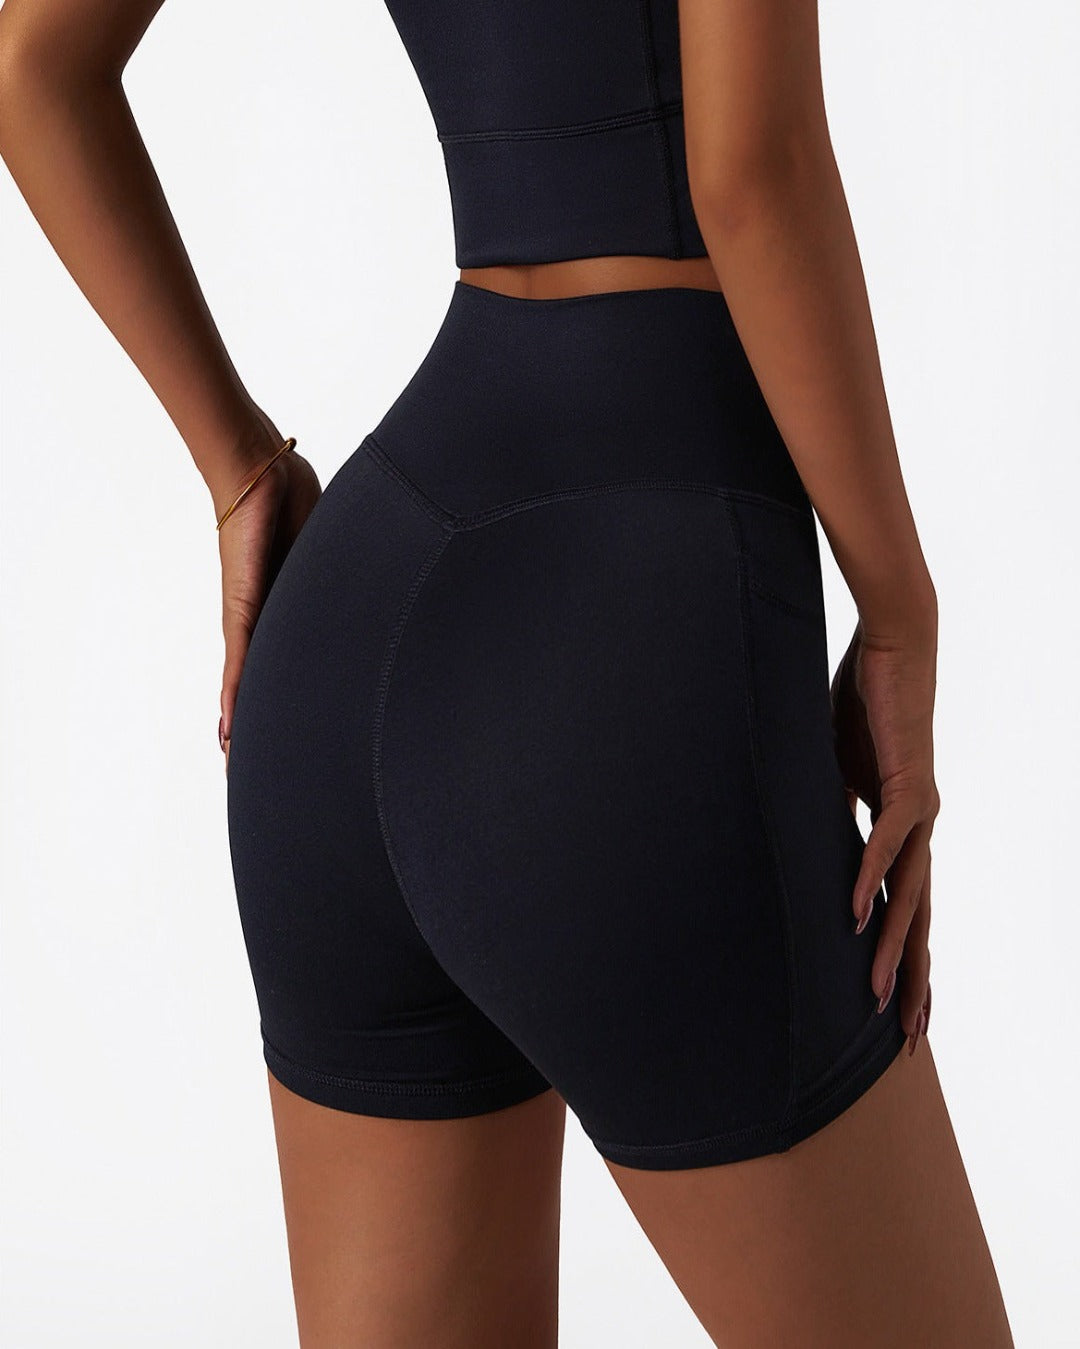 Black Buttery Smooth Mini Shorts